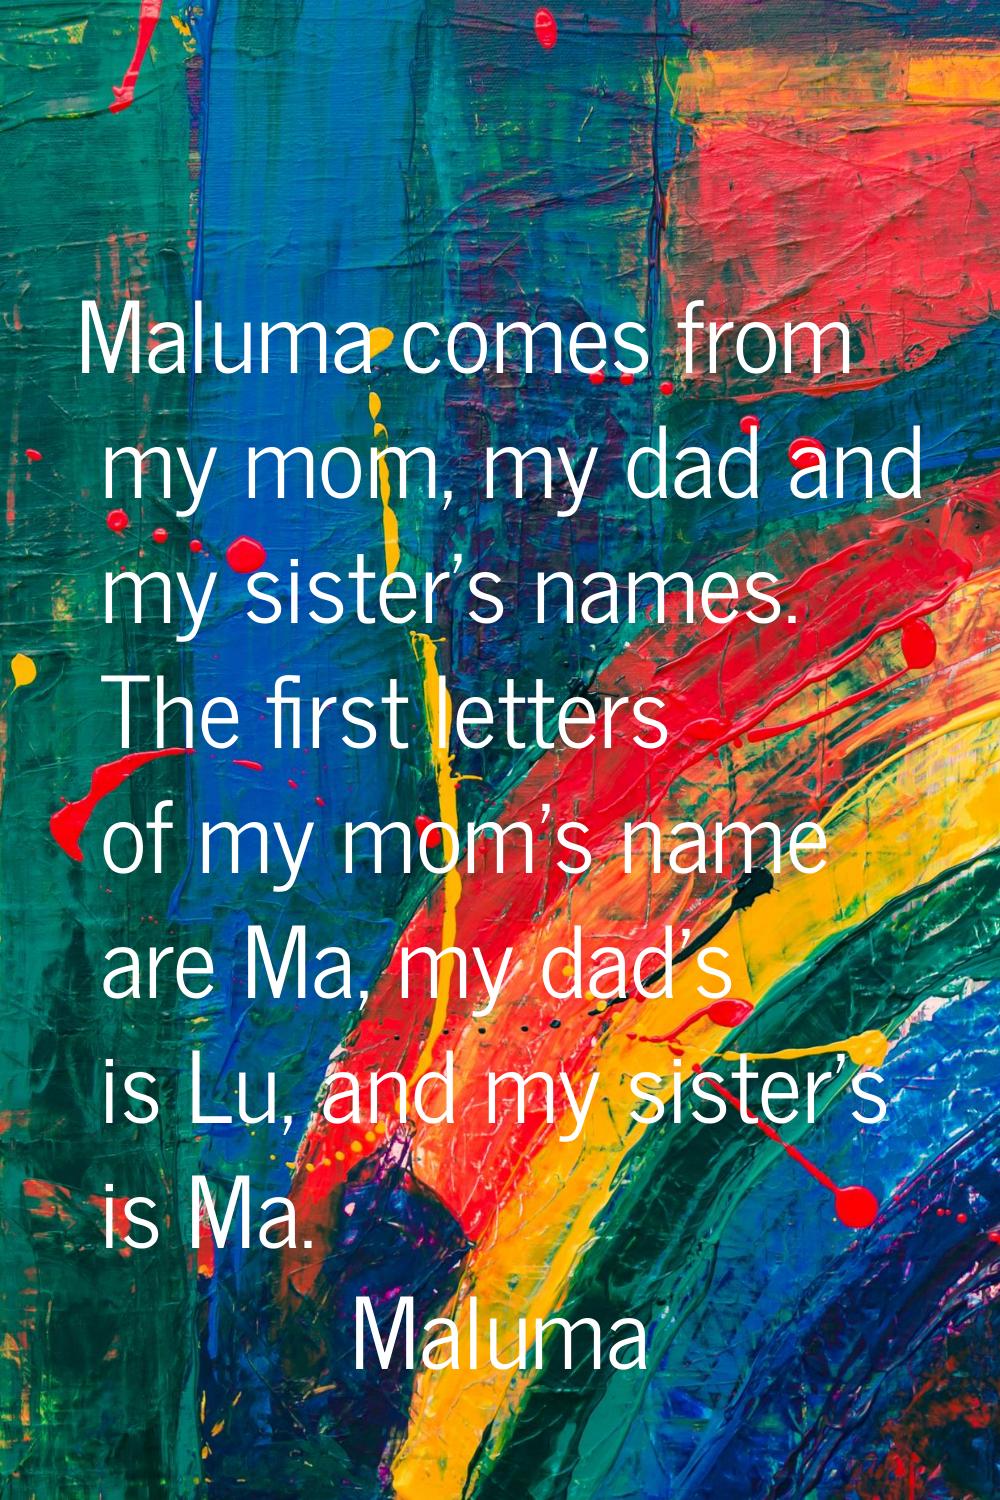 Maluma comes from my mom, my dad and my sister's names. The first letters of my mom's name are Ma, 